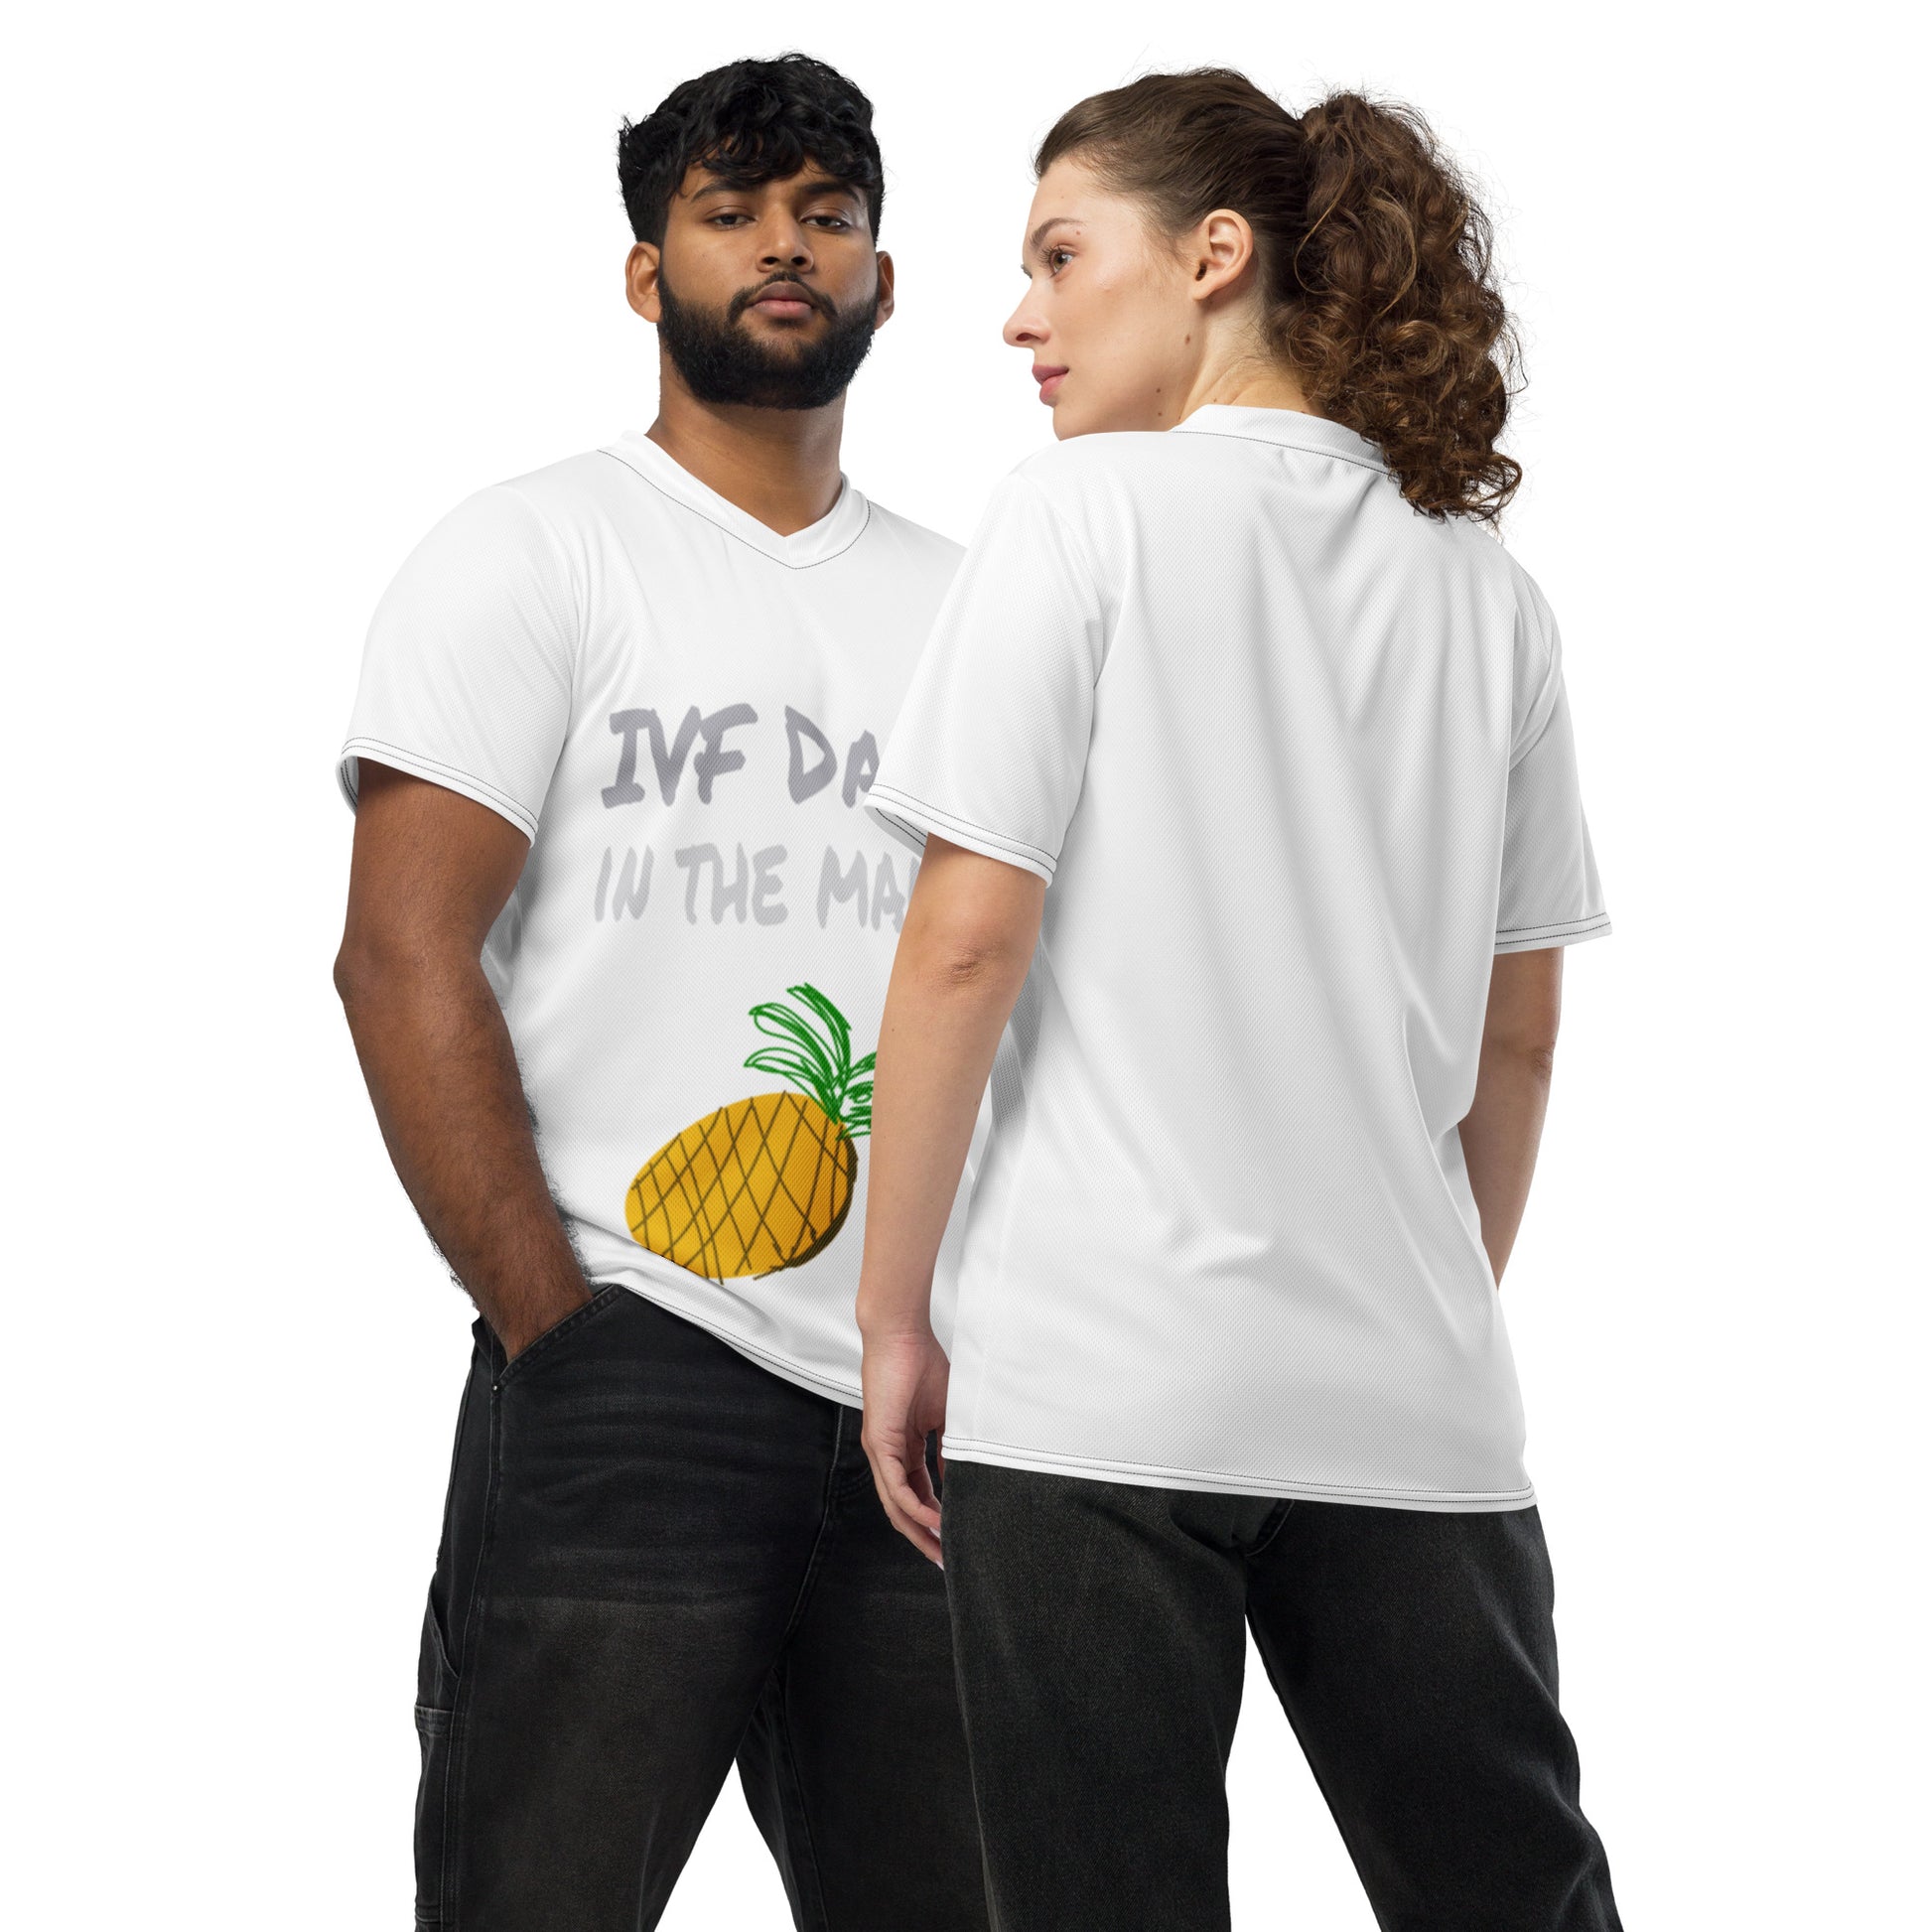 IVF daddy pineapple shirt Recycled Men's sports jersey - Young Hugs